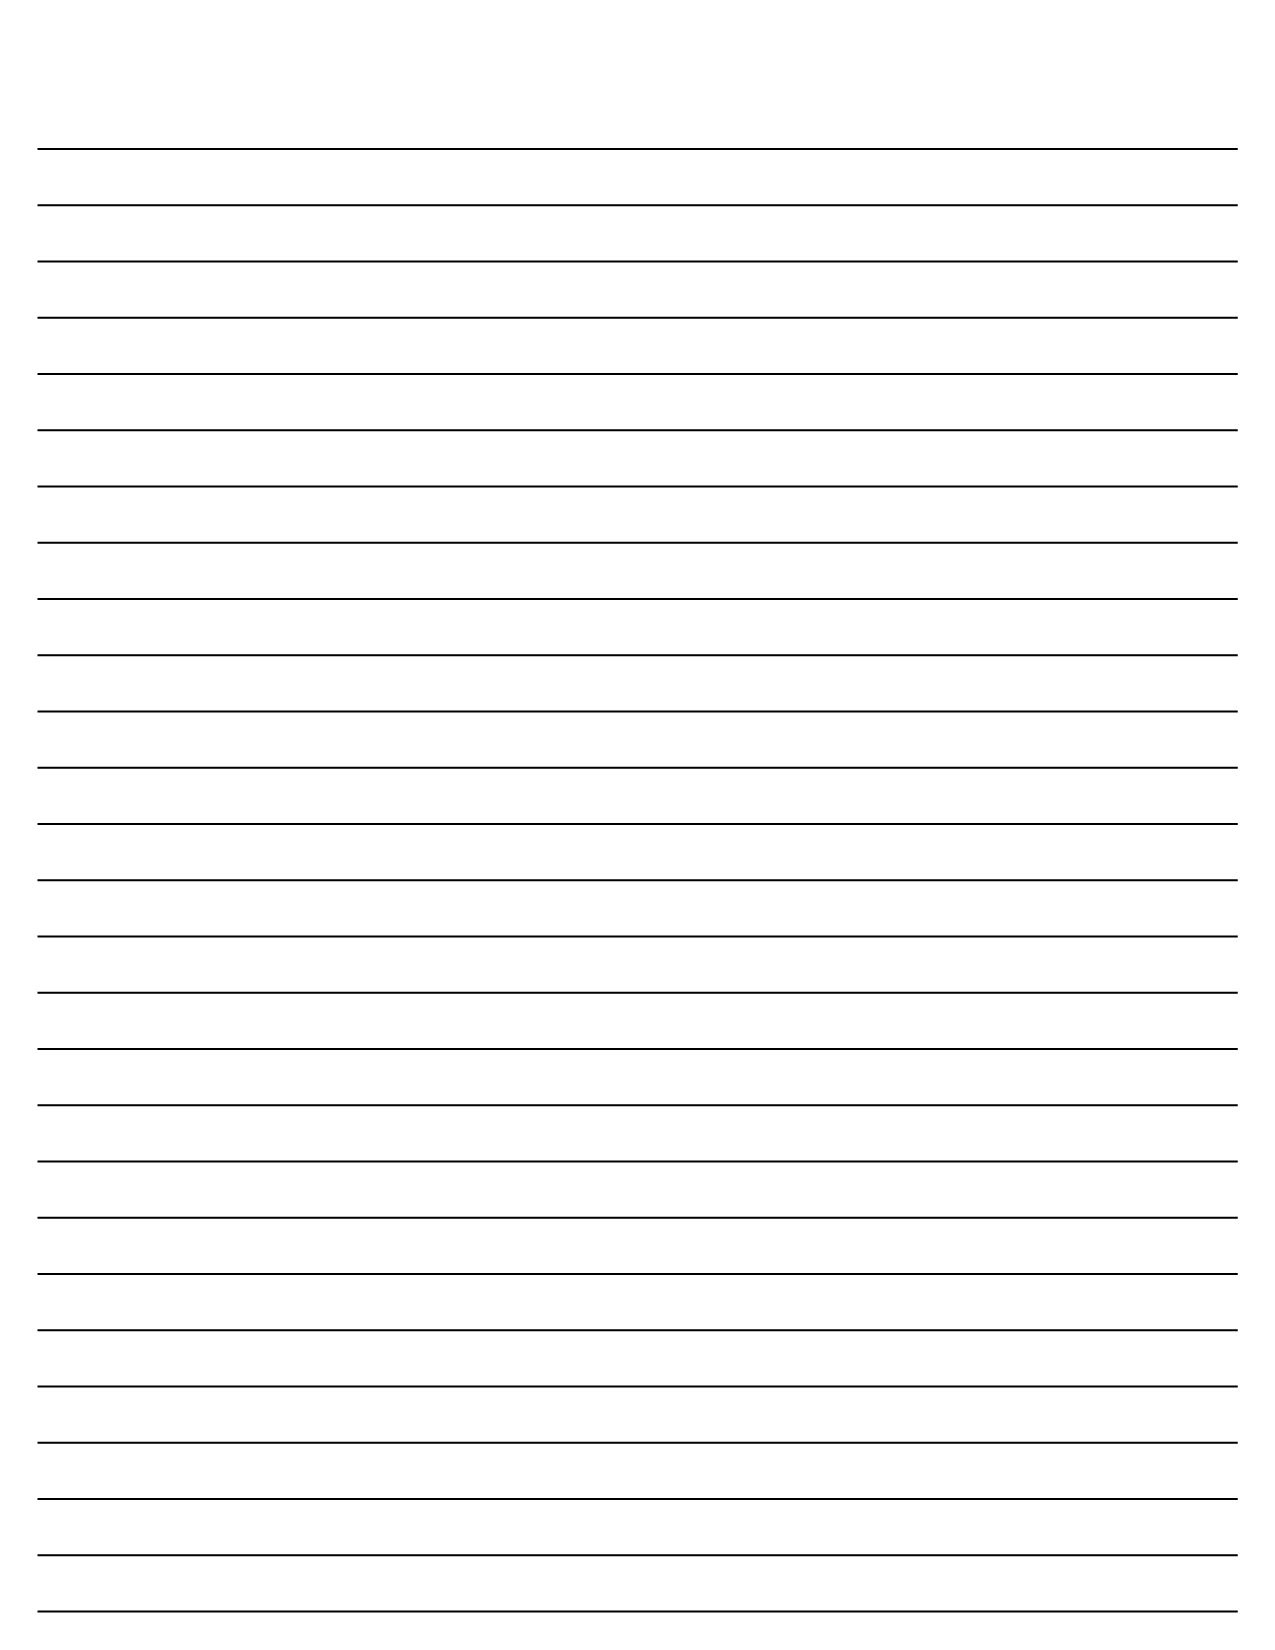 Printable Lined Paper Search Results Landscaping Gallery Paper 